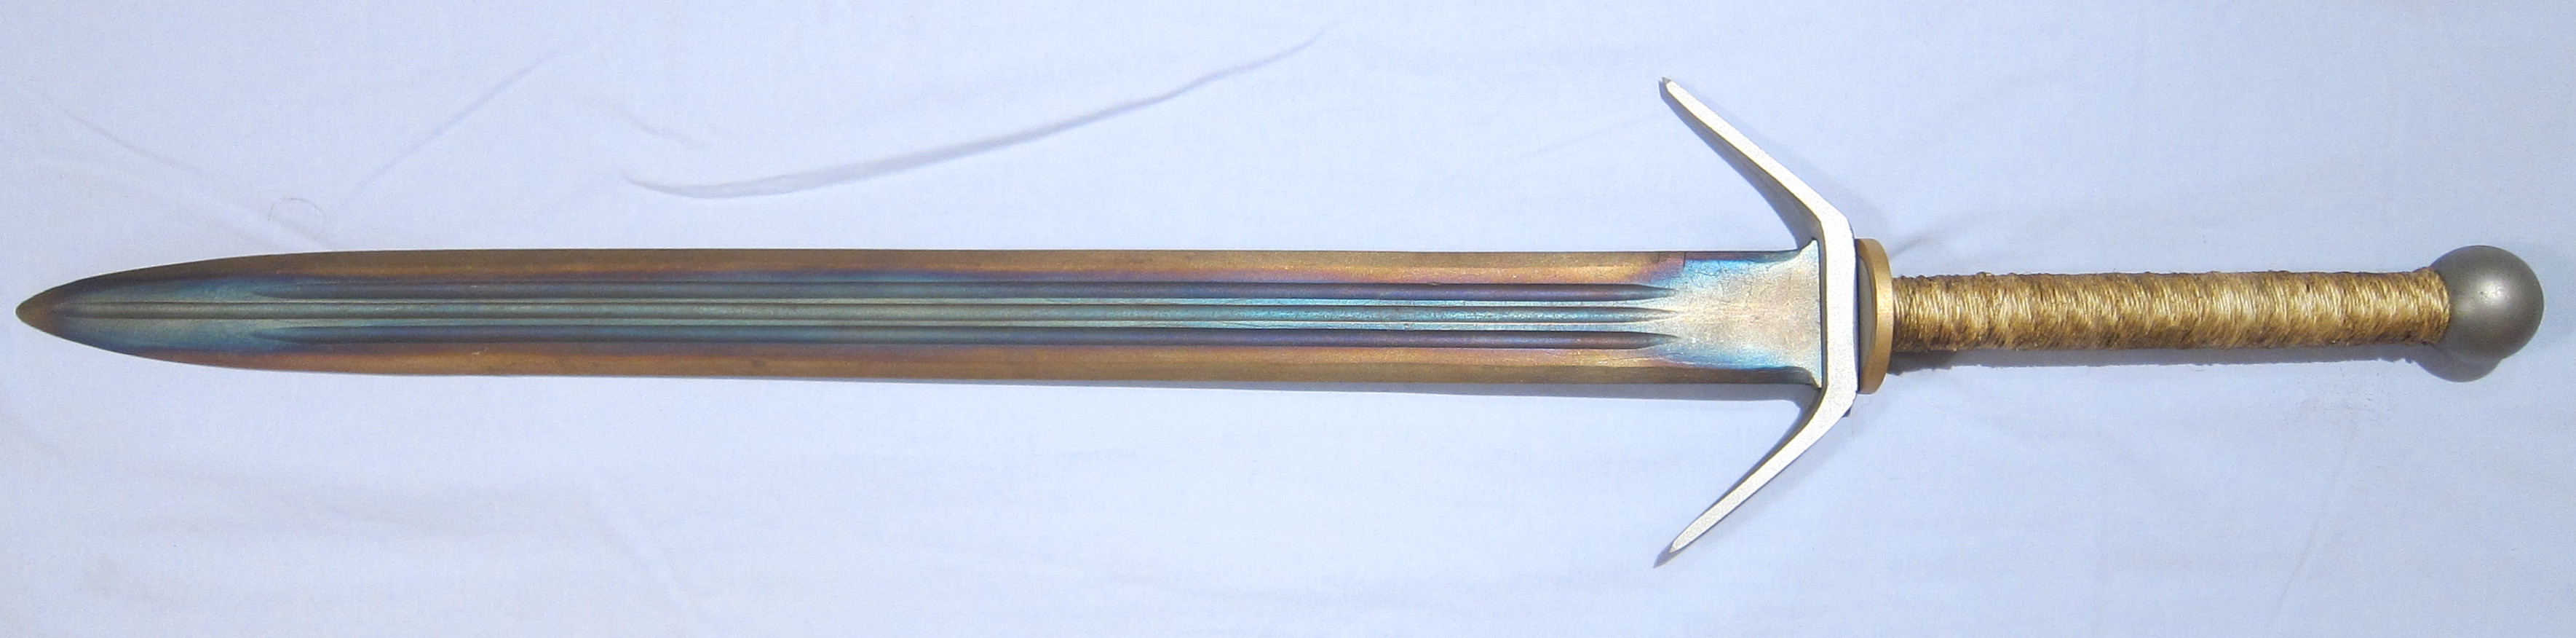 Differential tempered sword. Taken from wikimedia commons